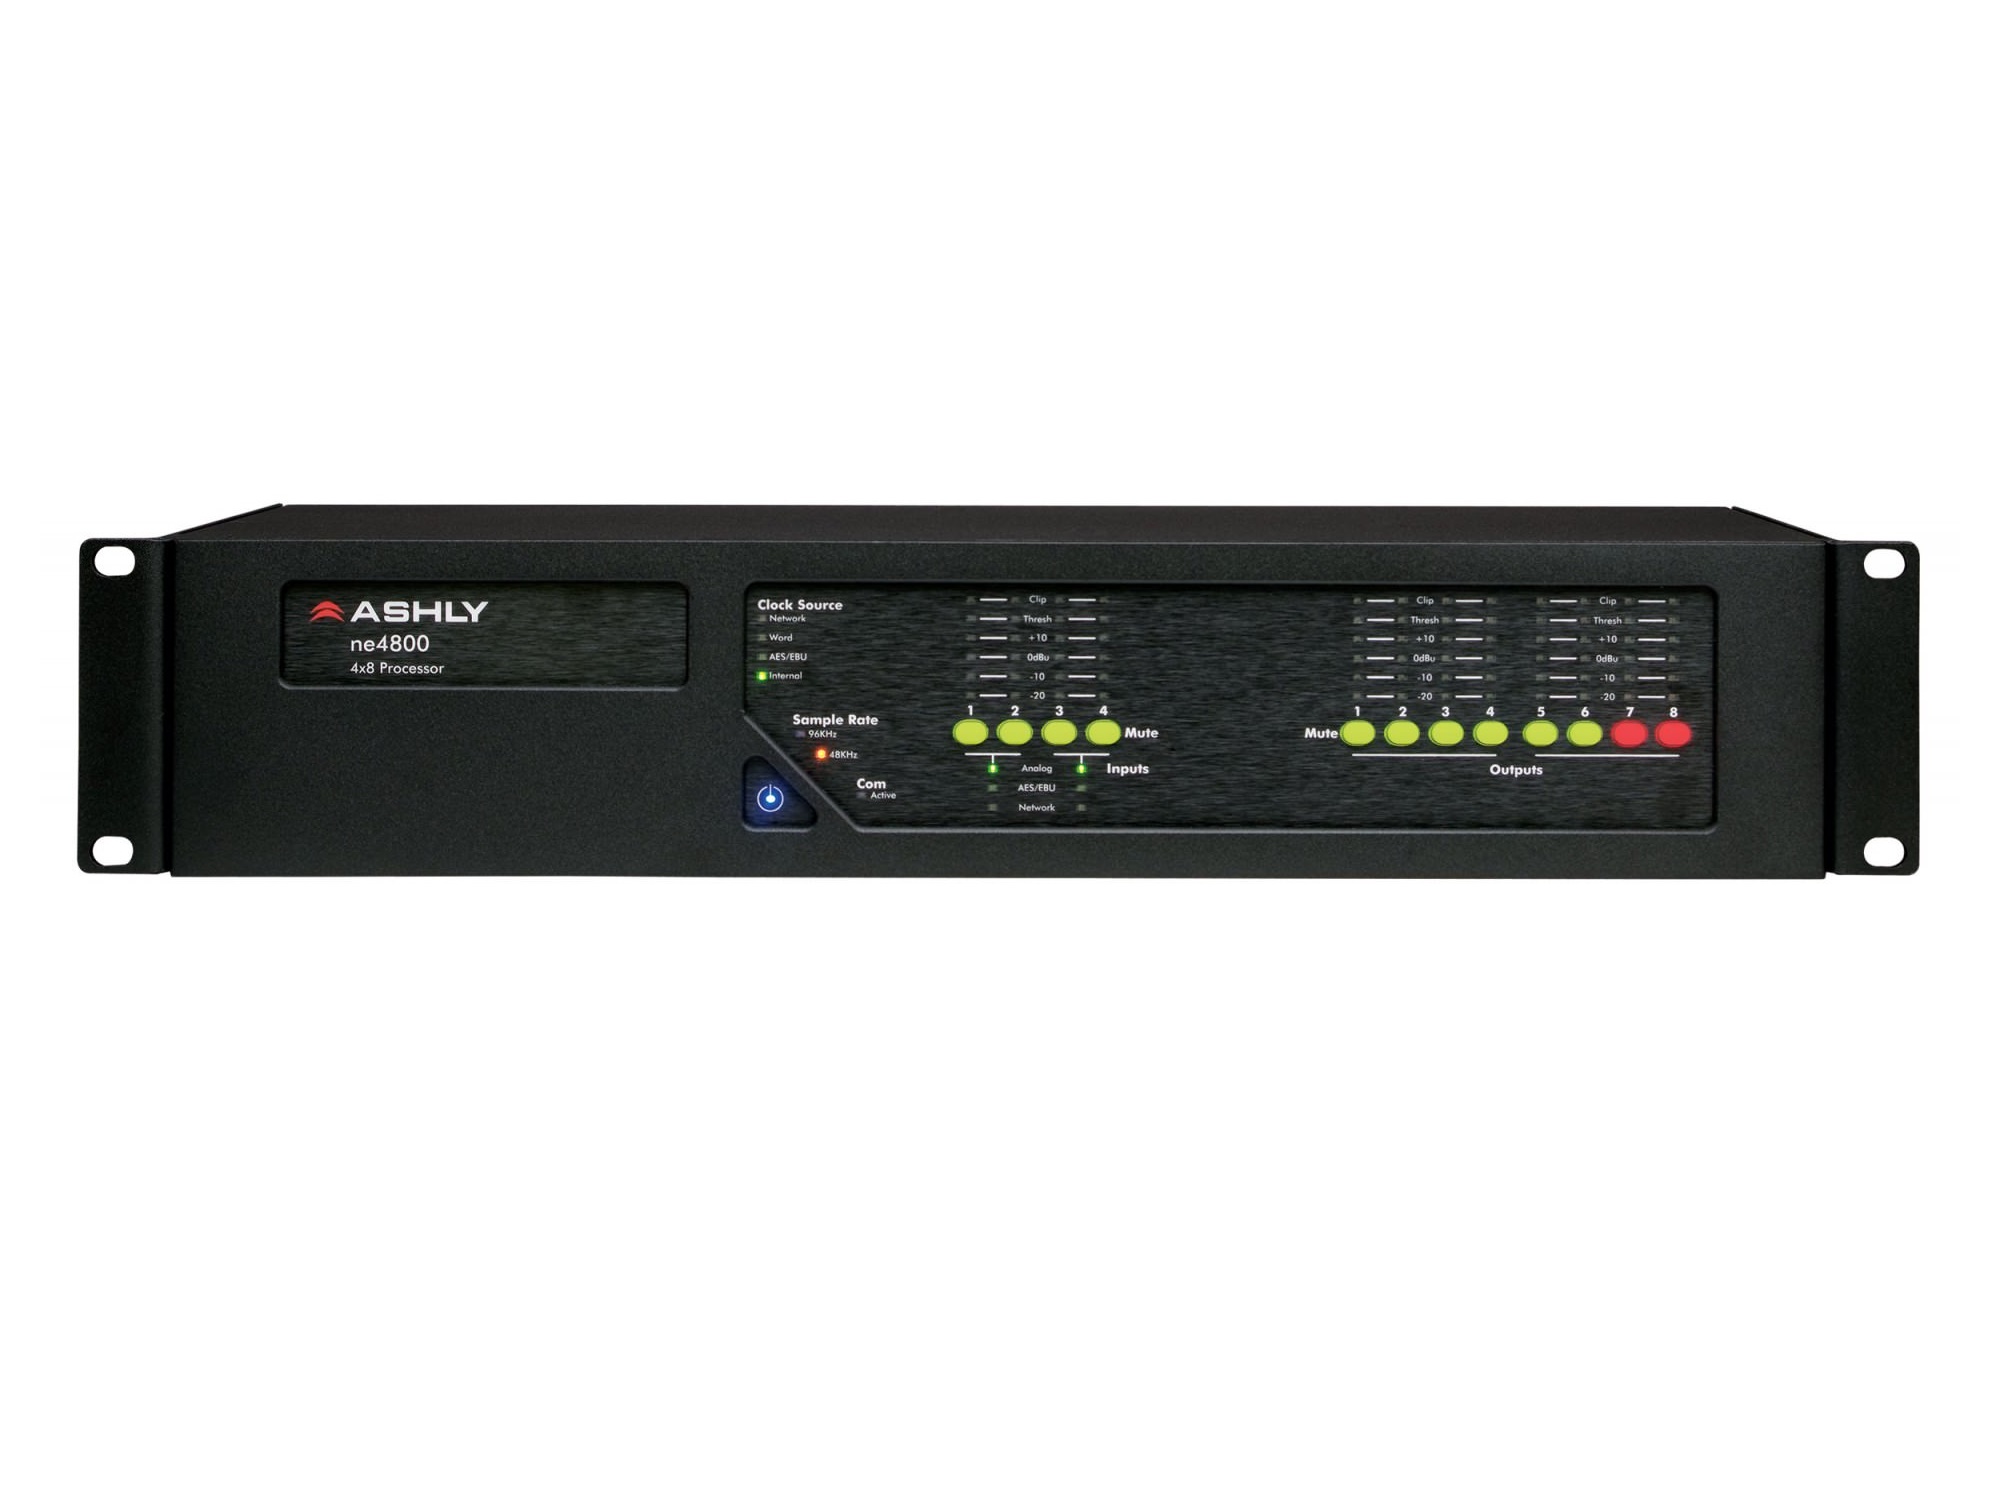 ne4800ad ne4800 Network Protea System Processor plus 4-Chan AES3 Inputs and Dante Network Card by Ashly